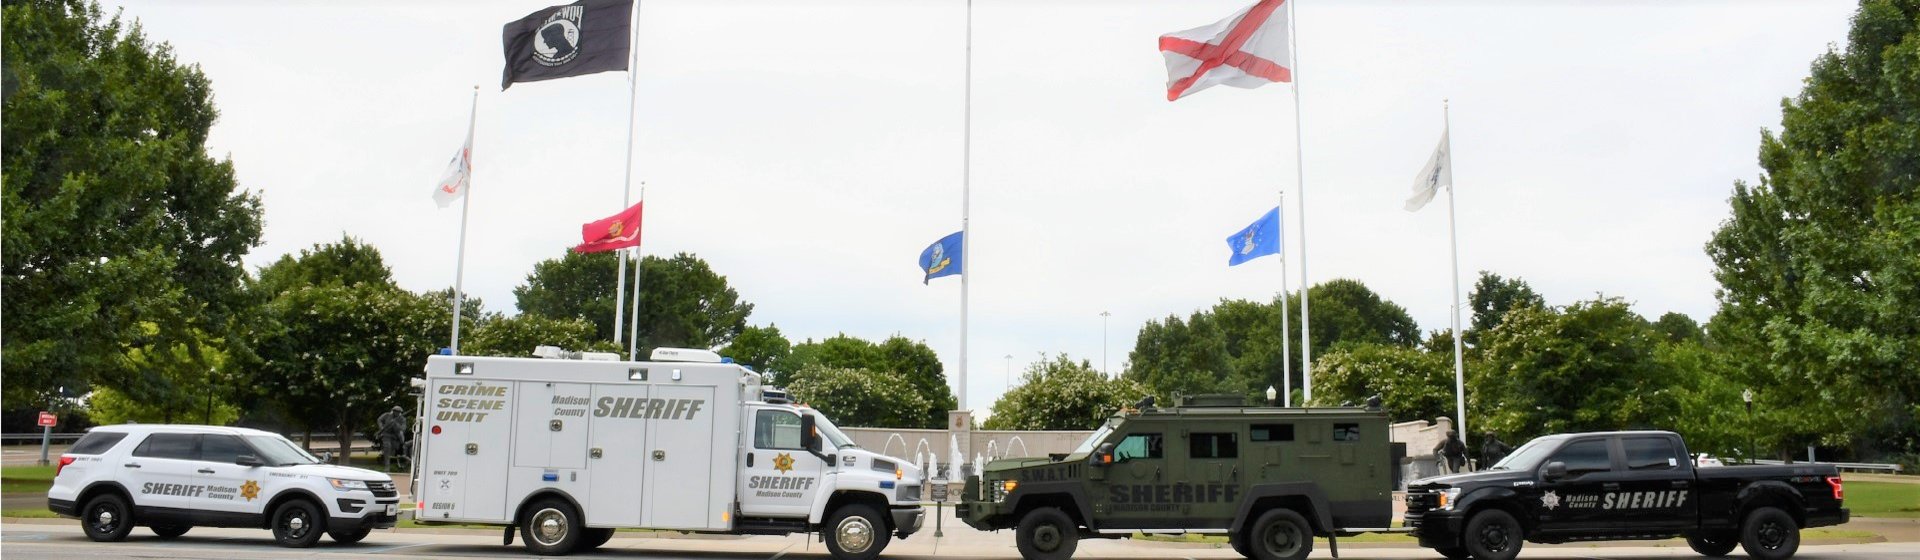 Four Sheriff’s Office vehicles parked in front of Memorial Fountain with flags raised behind the vehicles.